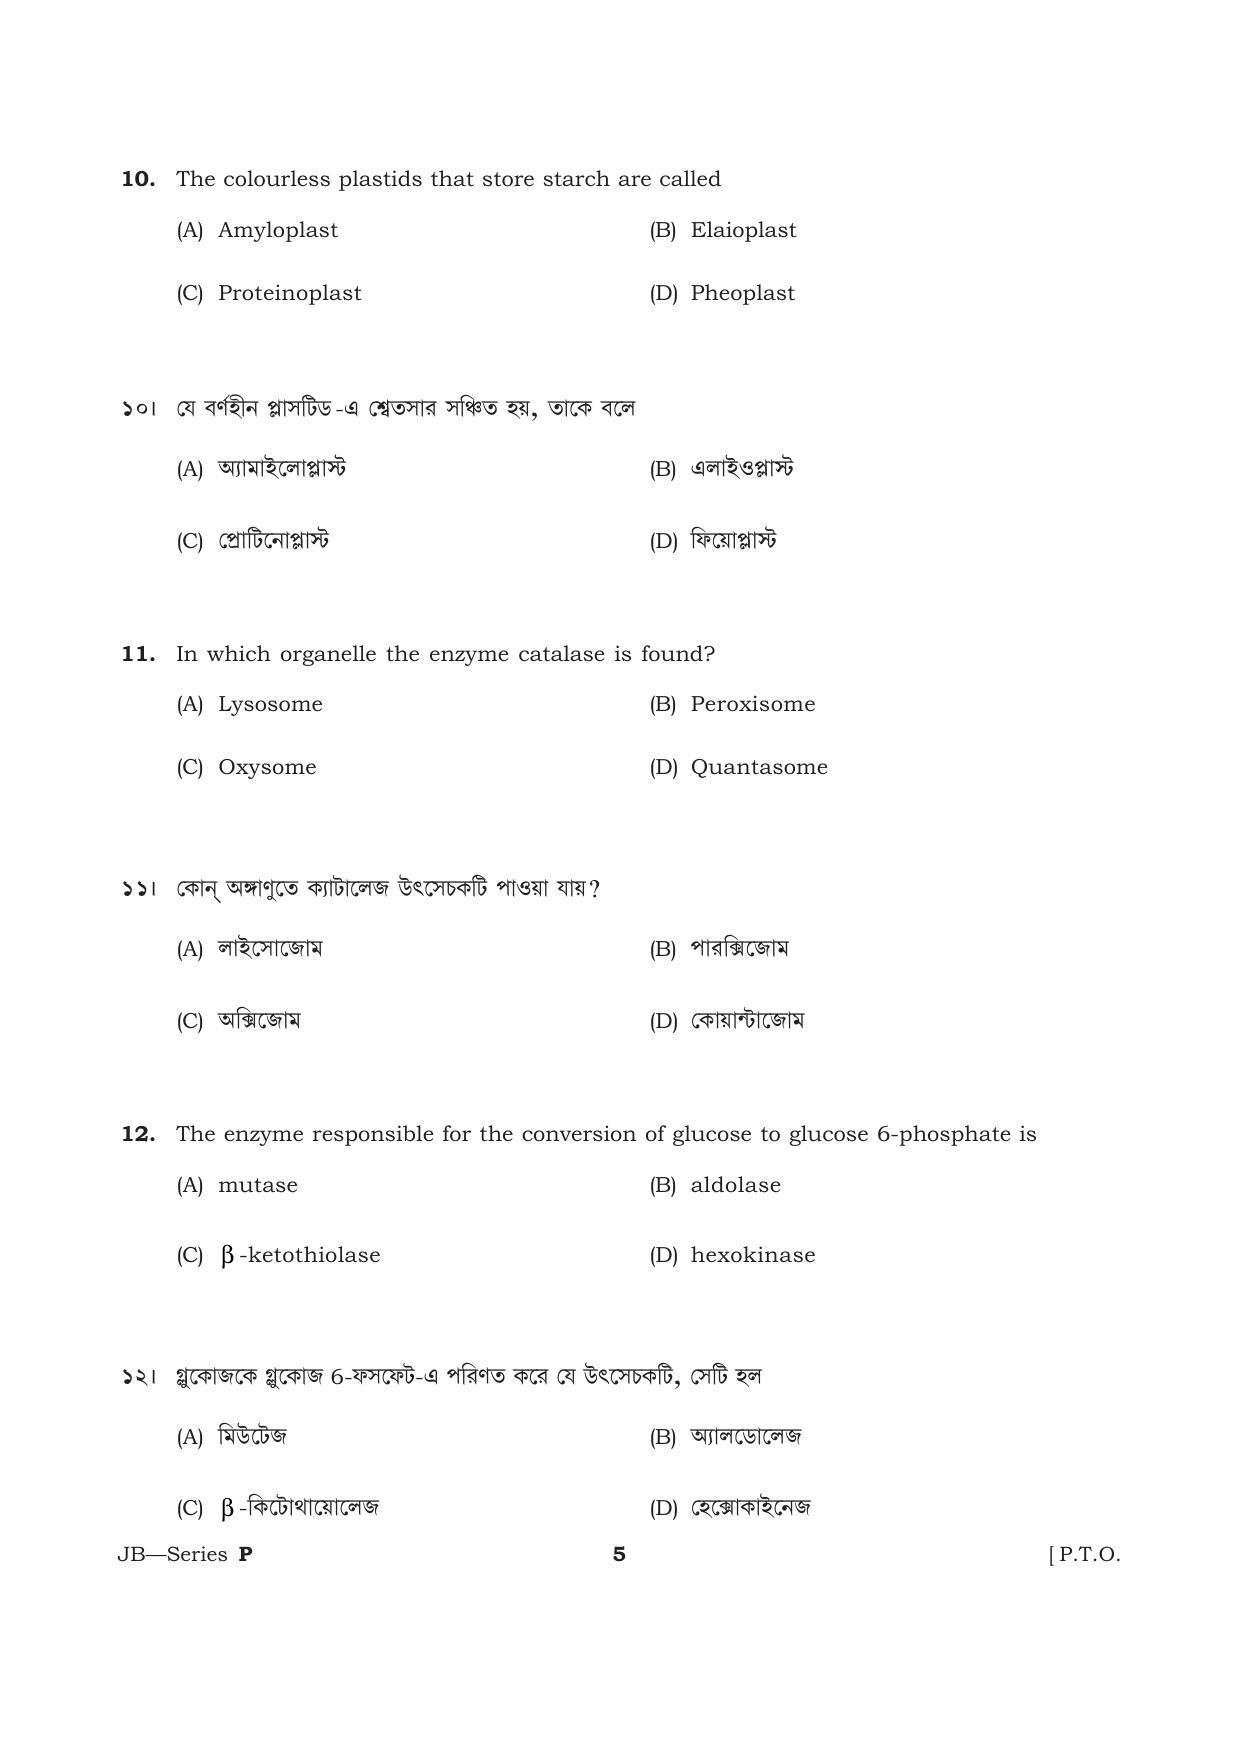 TBJEE Question Paper 2021 - Biology - Page 5